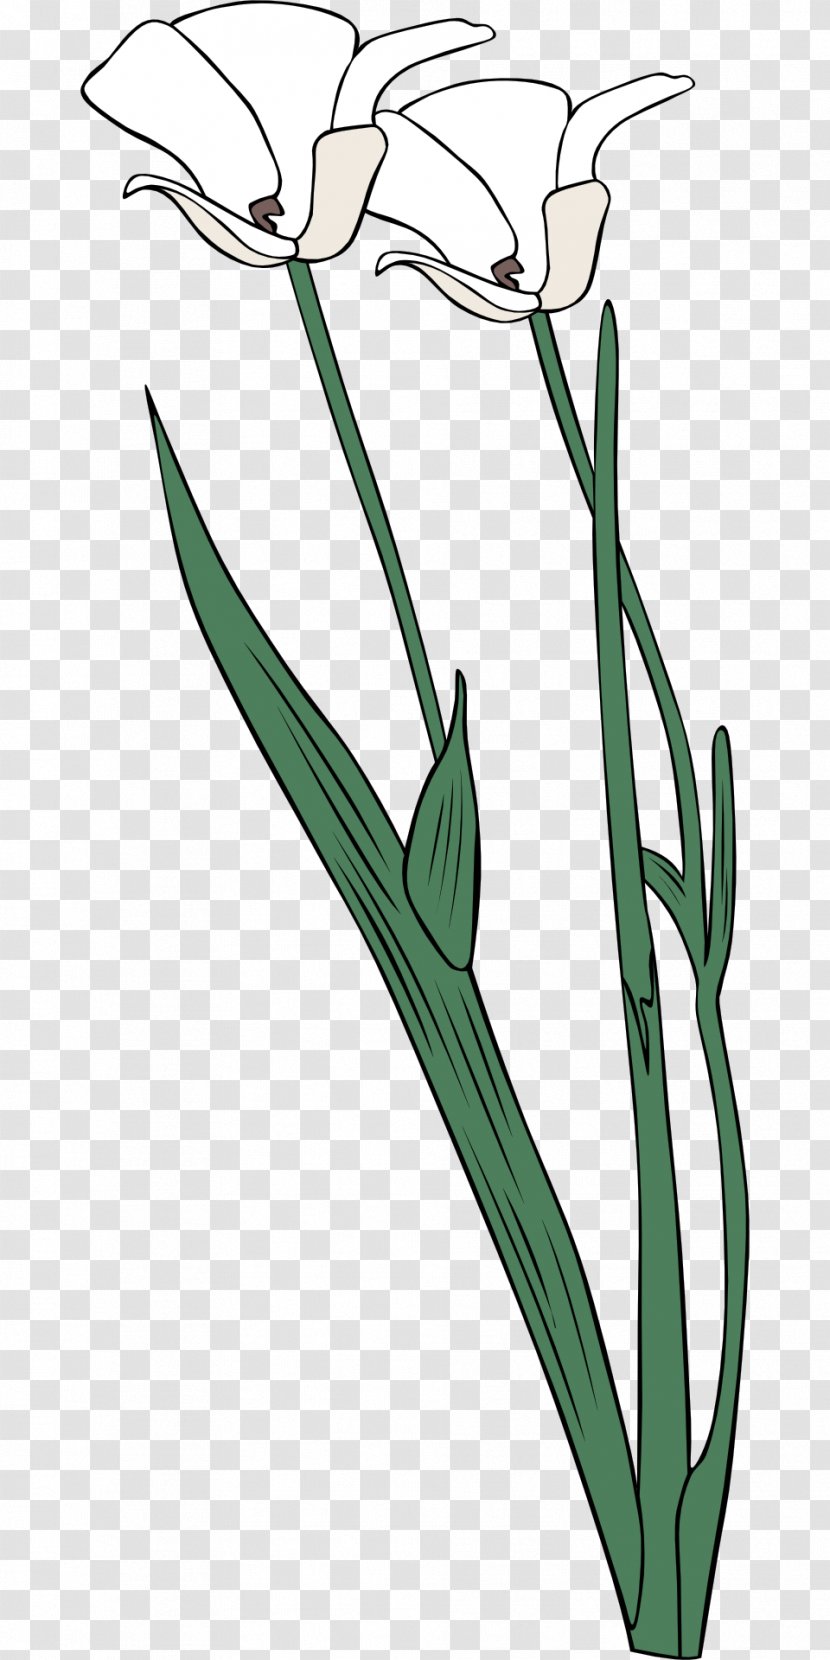 Clip Art - Licence Cc0 - Lily Of The Valley Transparent PNG